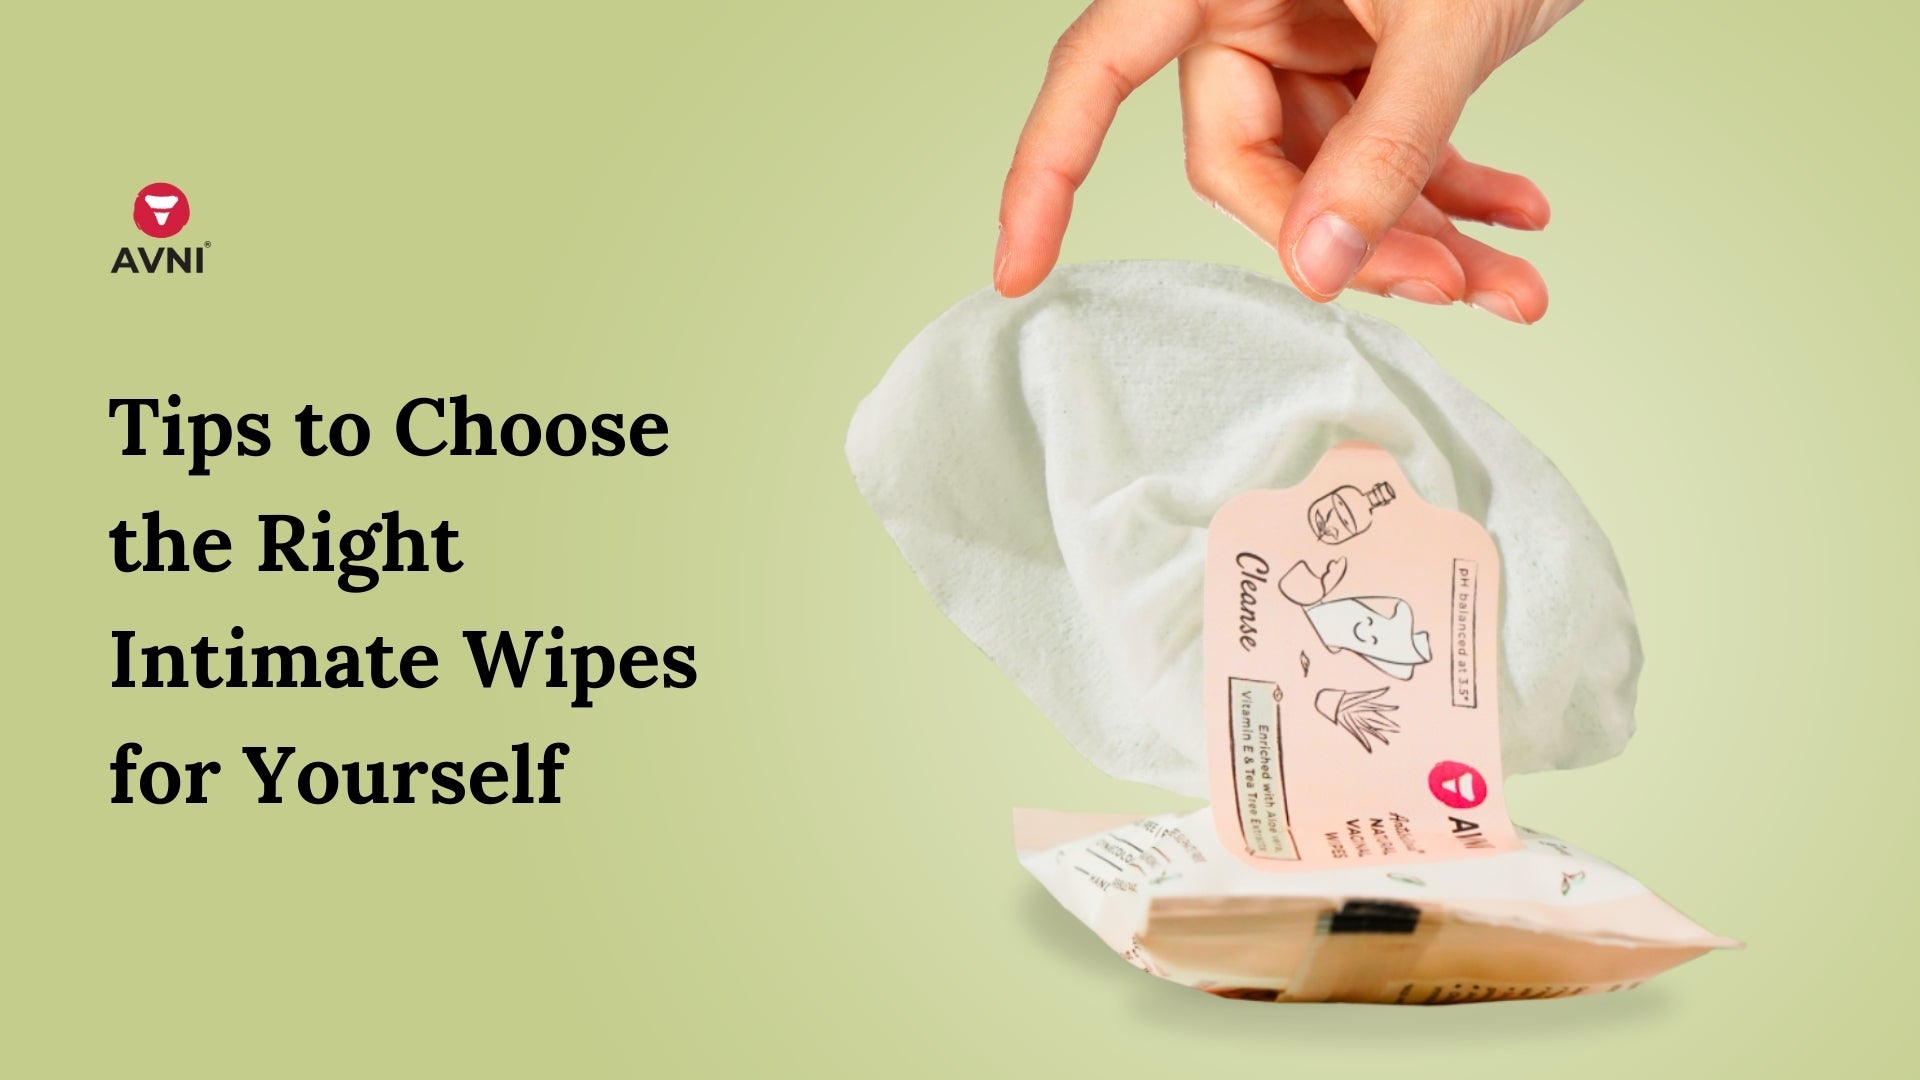 Tips to Choose the Right Intimate Wipes for Yourself